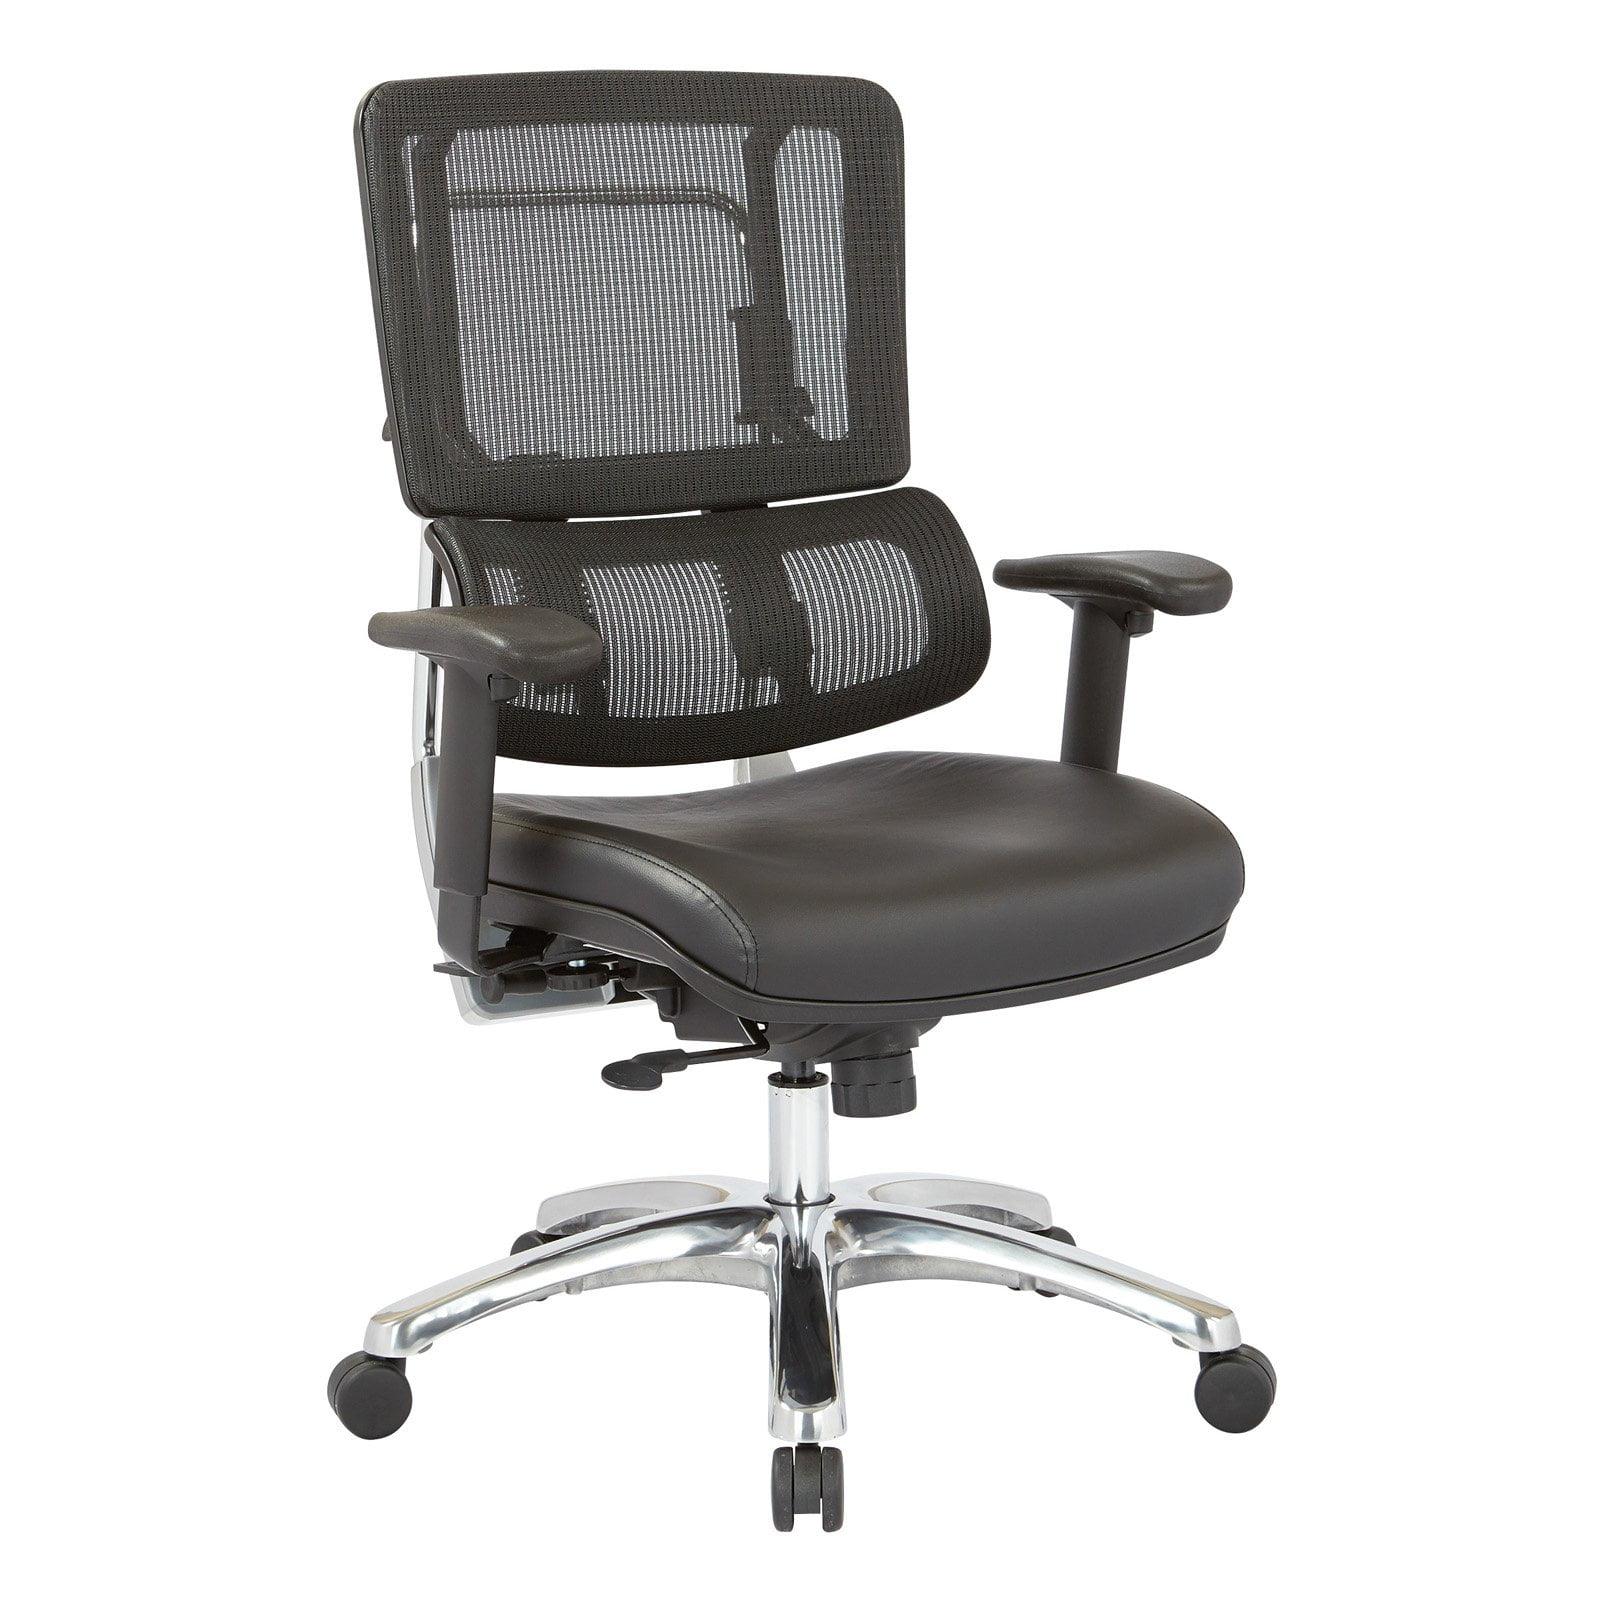 Executive Swivel Office Chair with Adjustable Arms and Multicolor Mesh